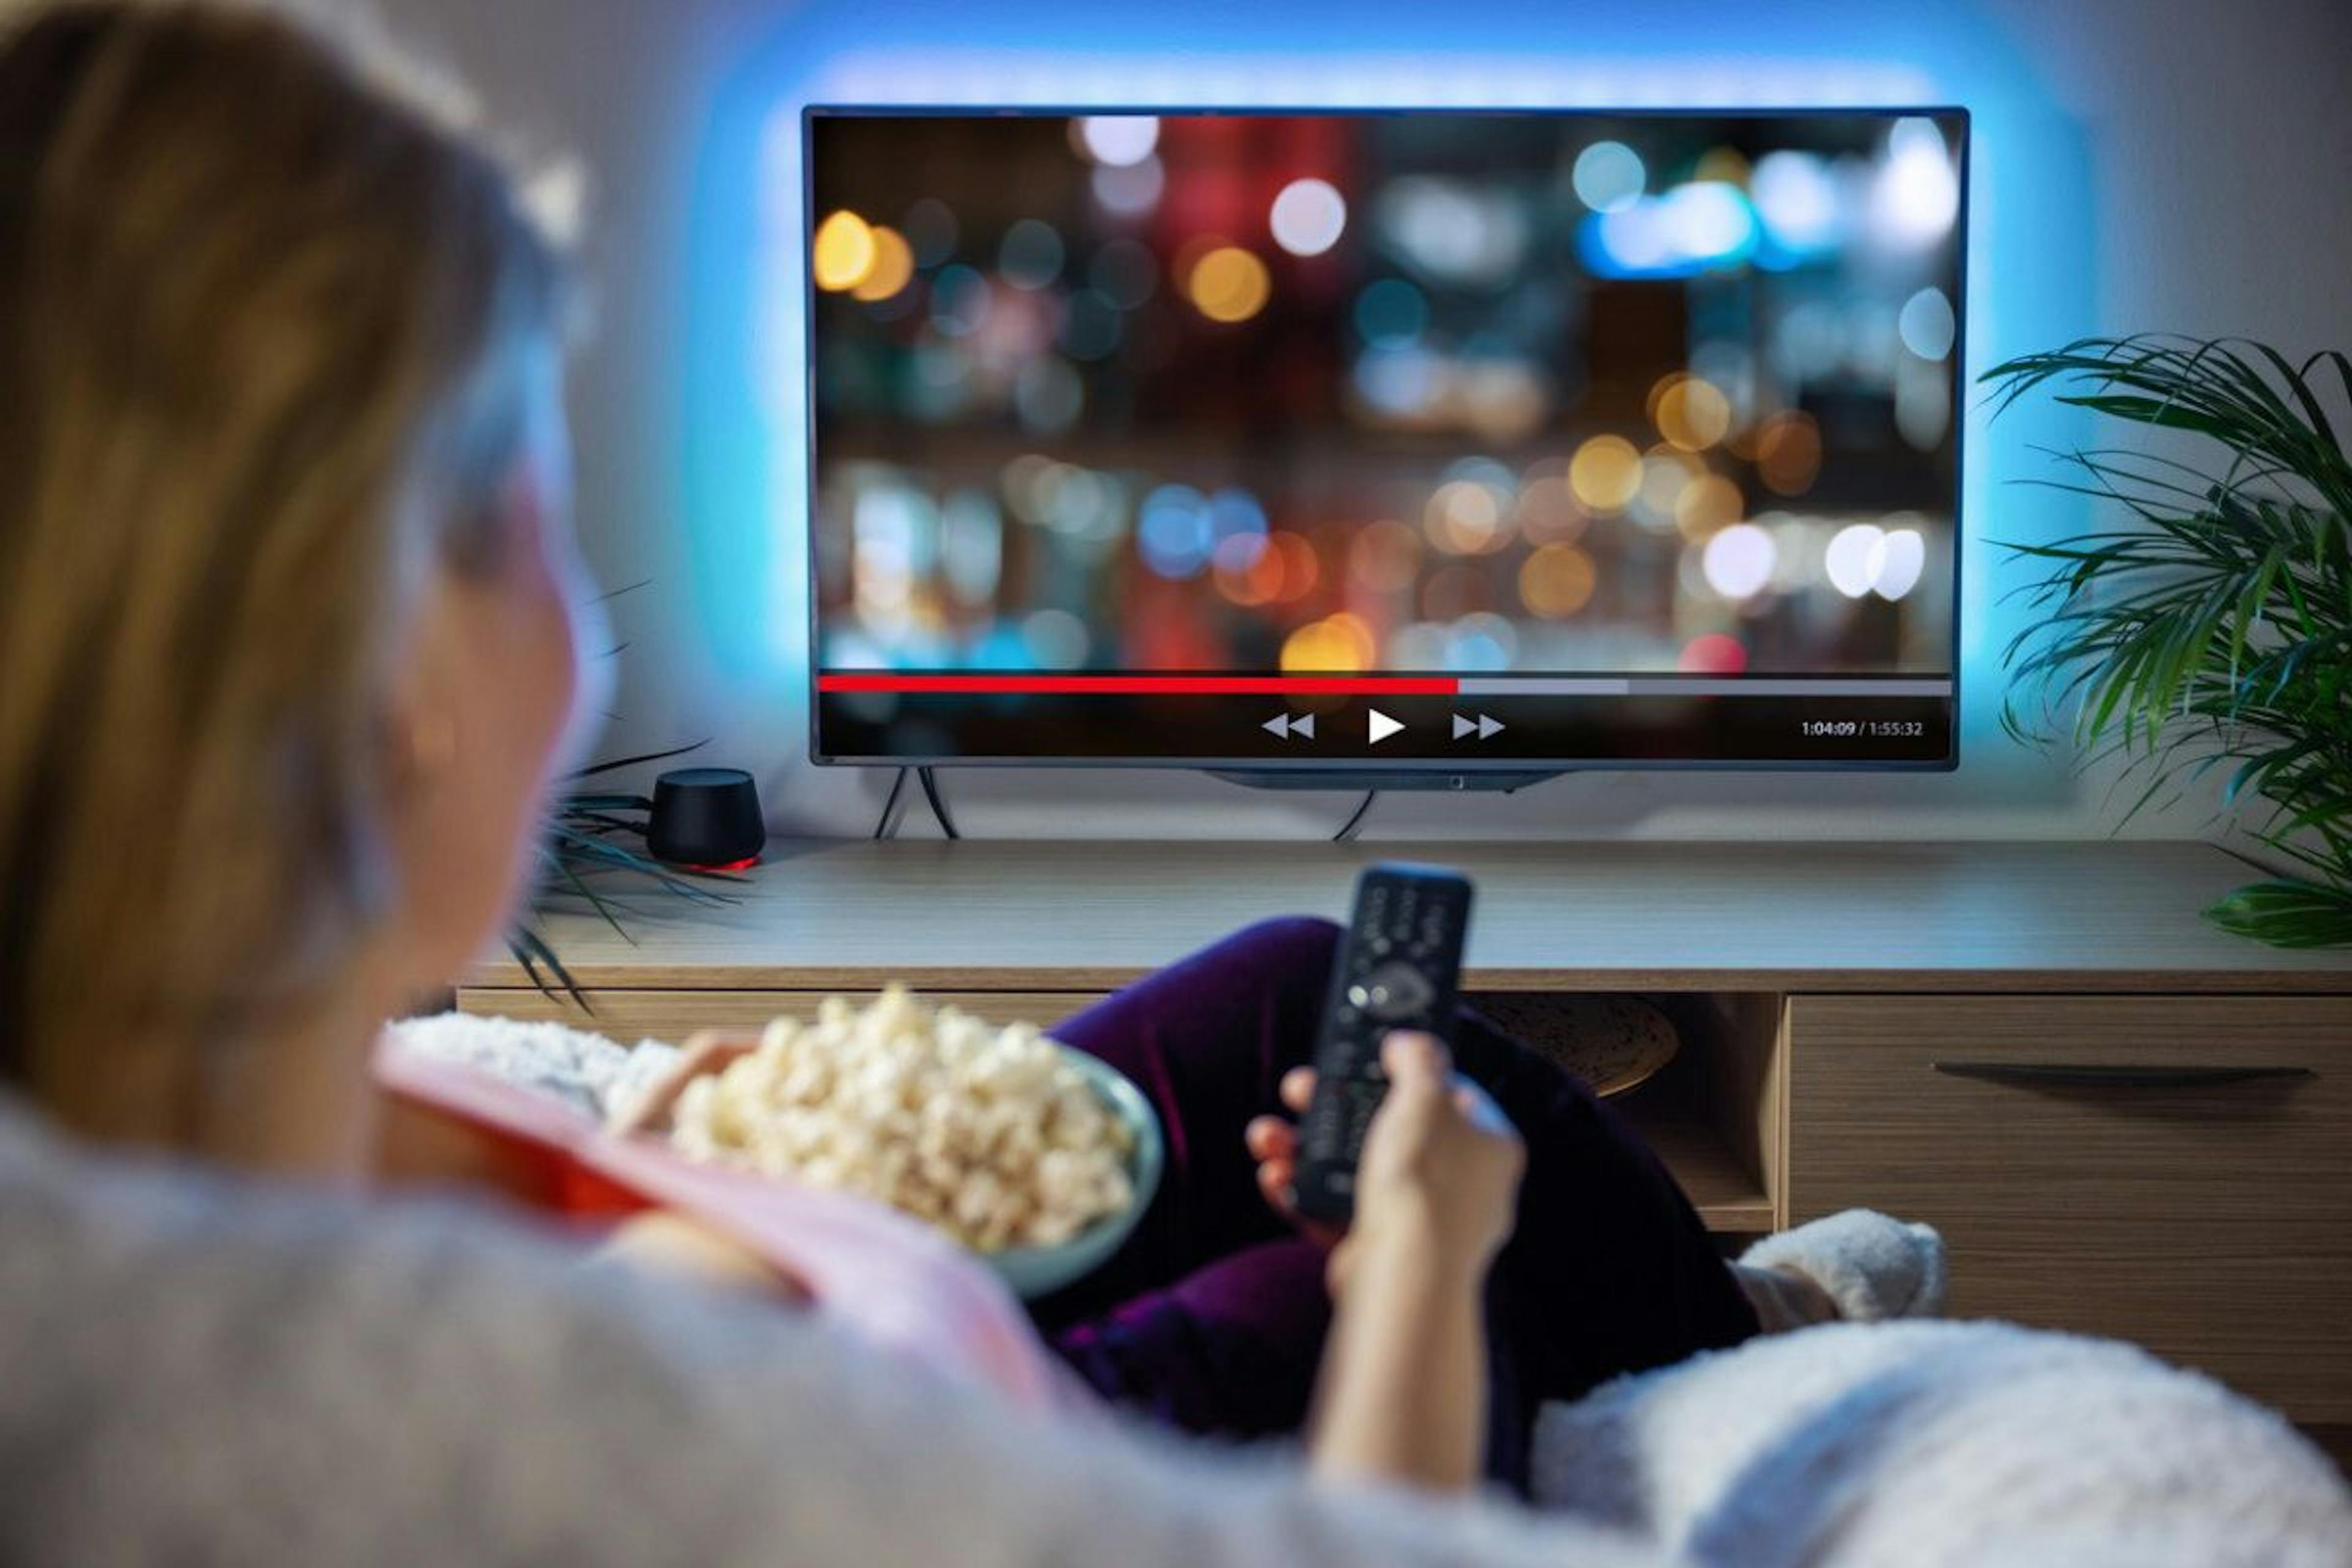 featured image - Connected TVs: Evolution for the Gaming Industry